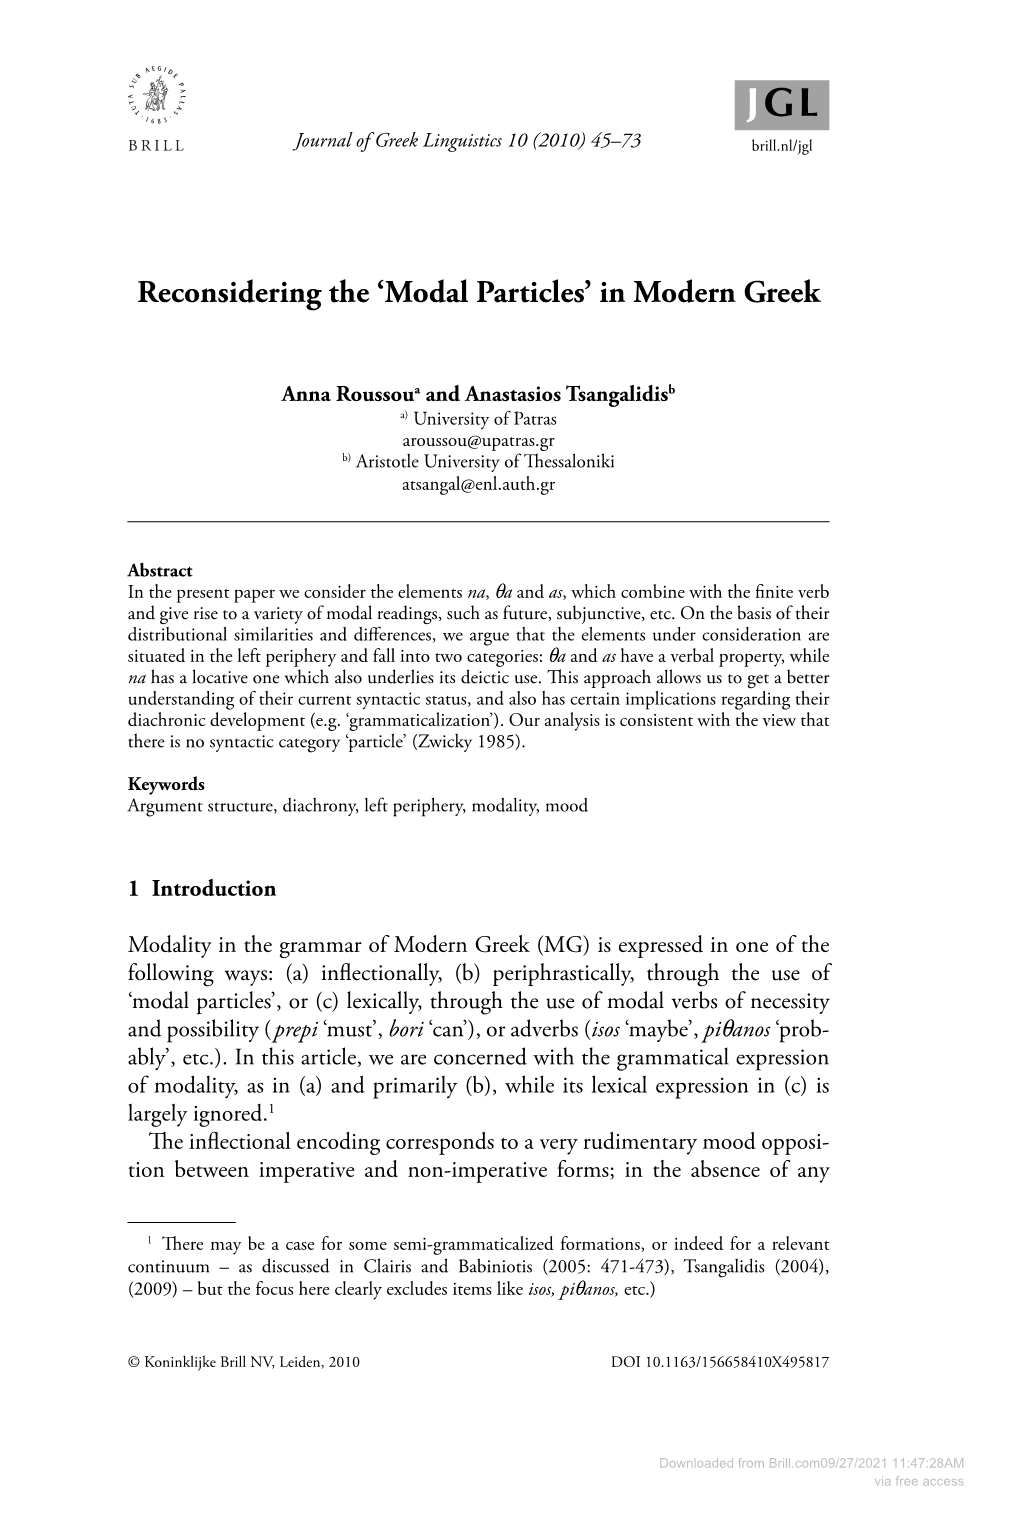 Reconsidering the 'Modal Particles' in Modern Greek